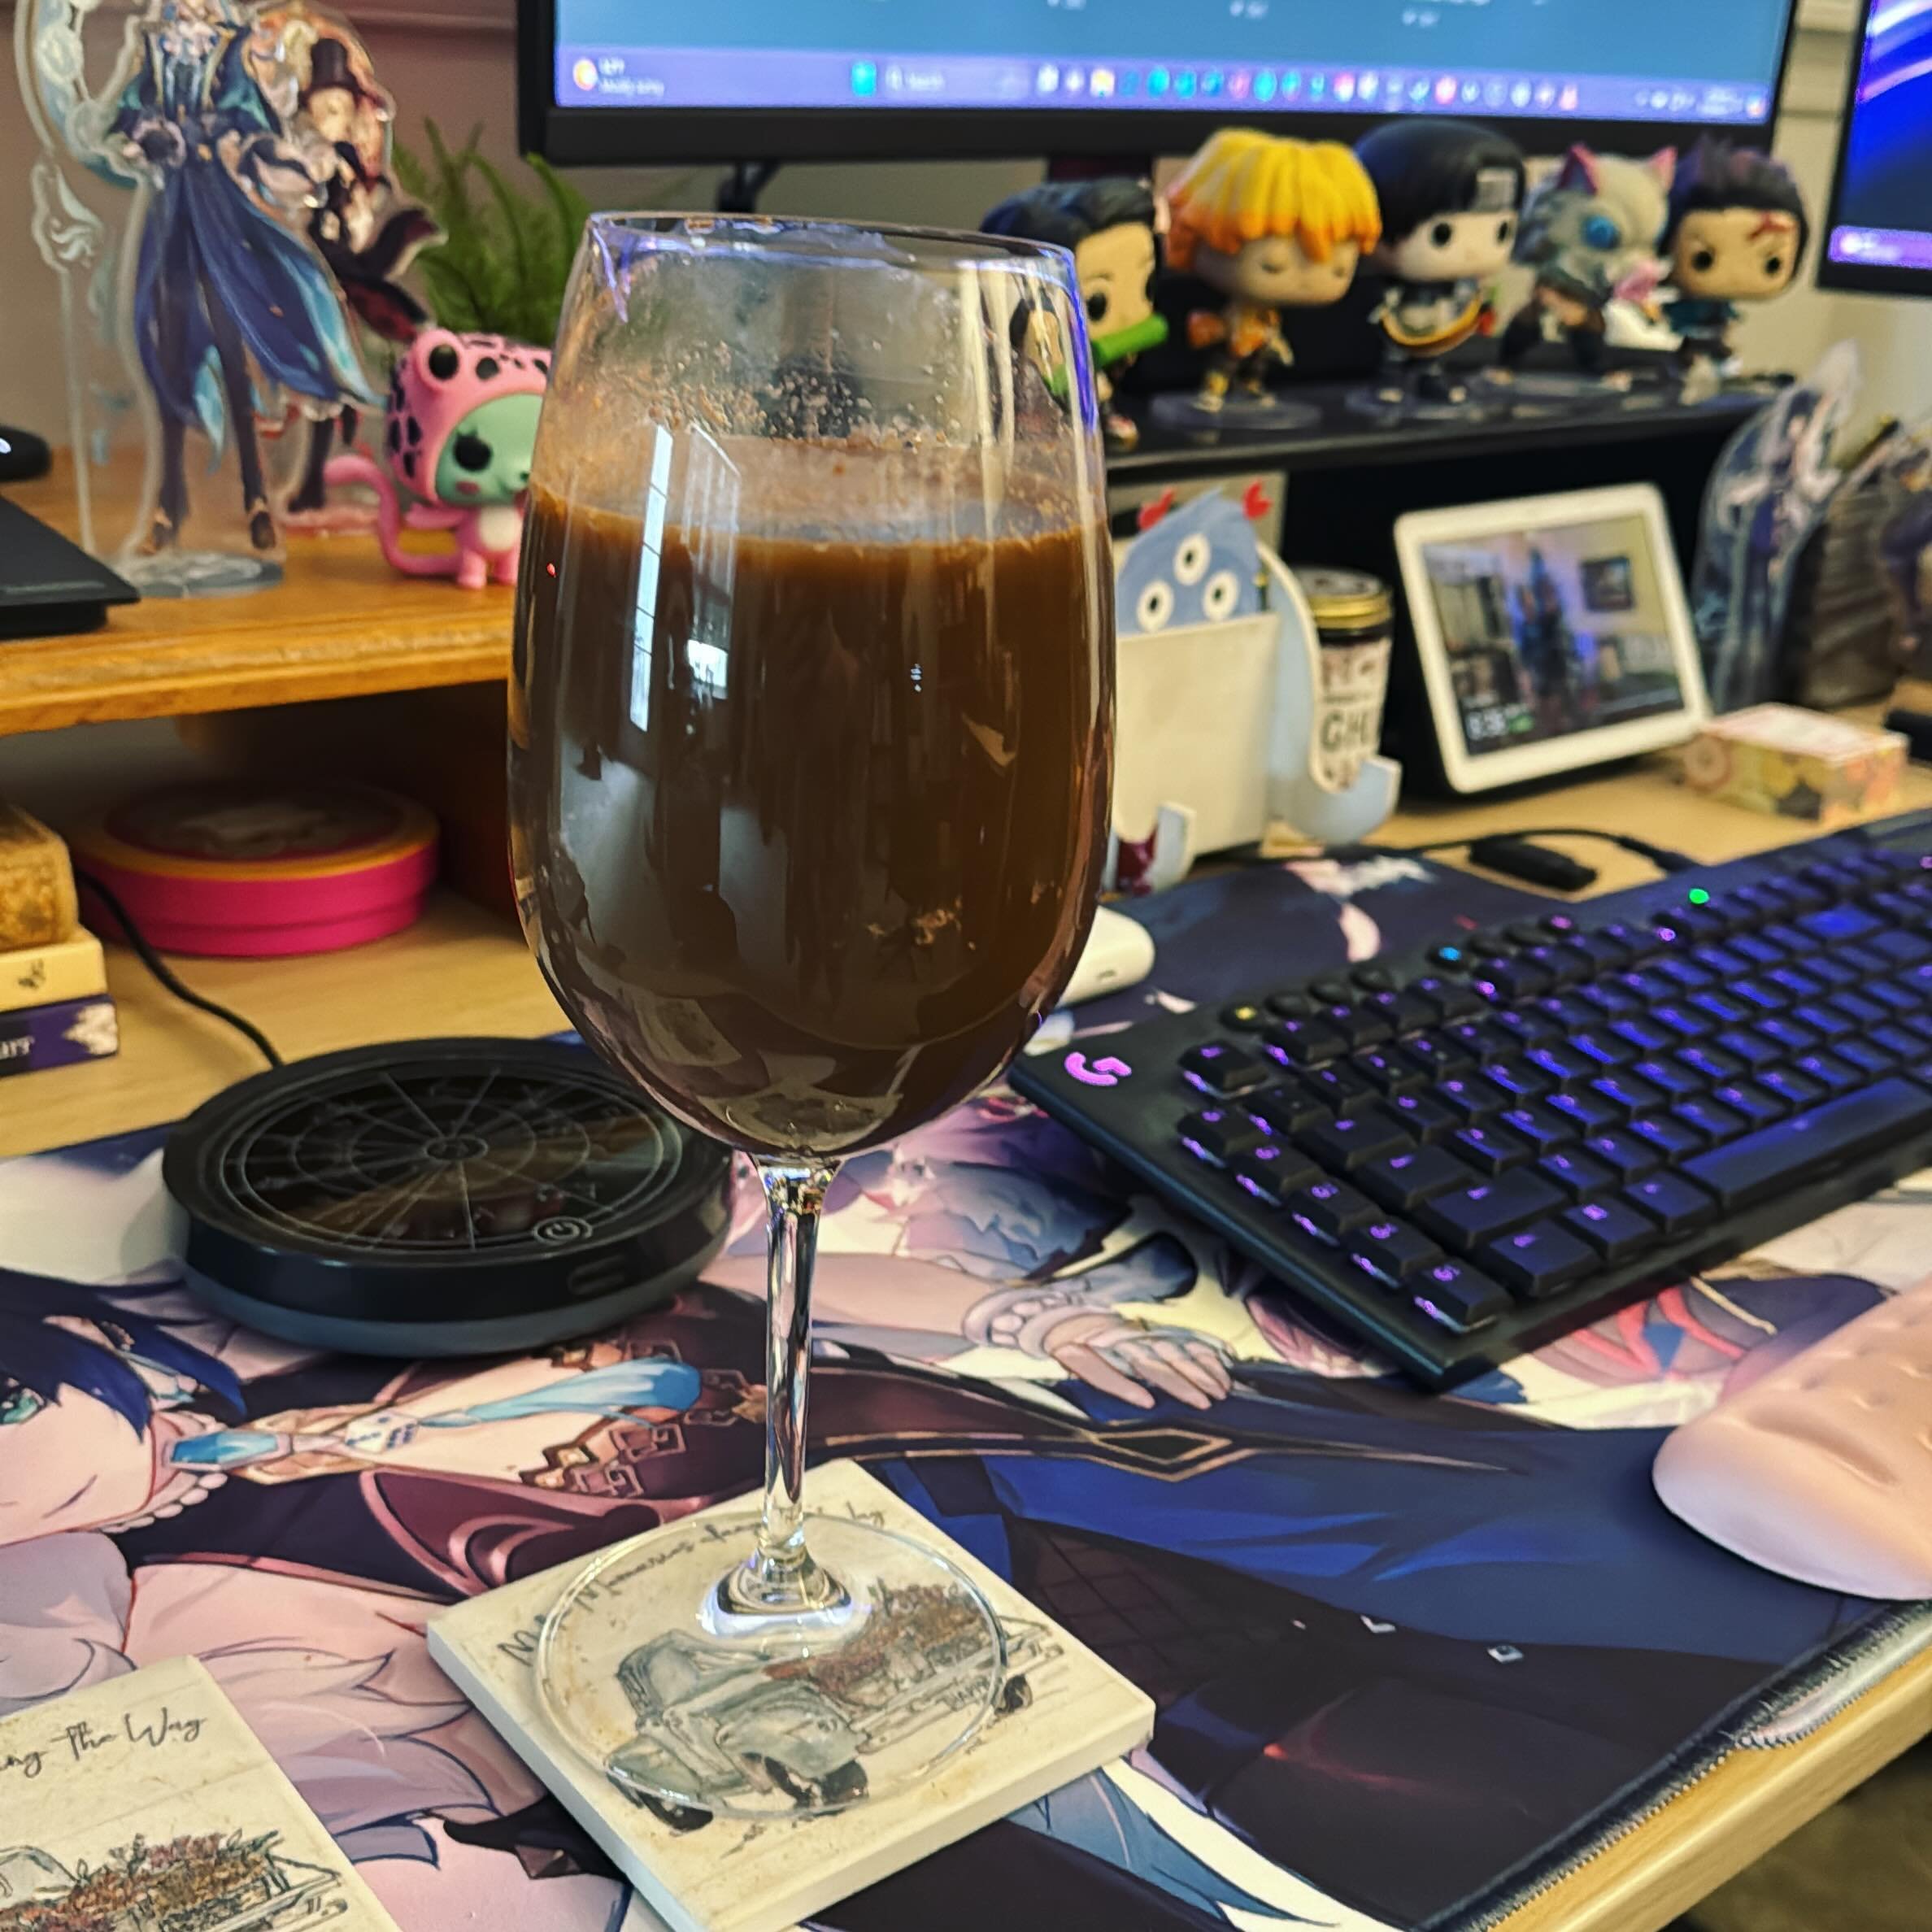 I&rsquo;m trying something different with my morning coffee. Going cold today with vanilla, unsweetened oat milk and a scoop of &mdash; wait for it, hot chocolate mix (the water dissolvable kind). Super yummy, and totally deserves the wine glass trea